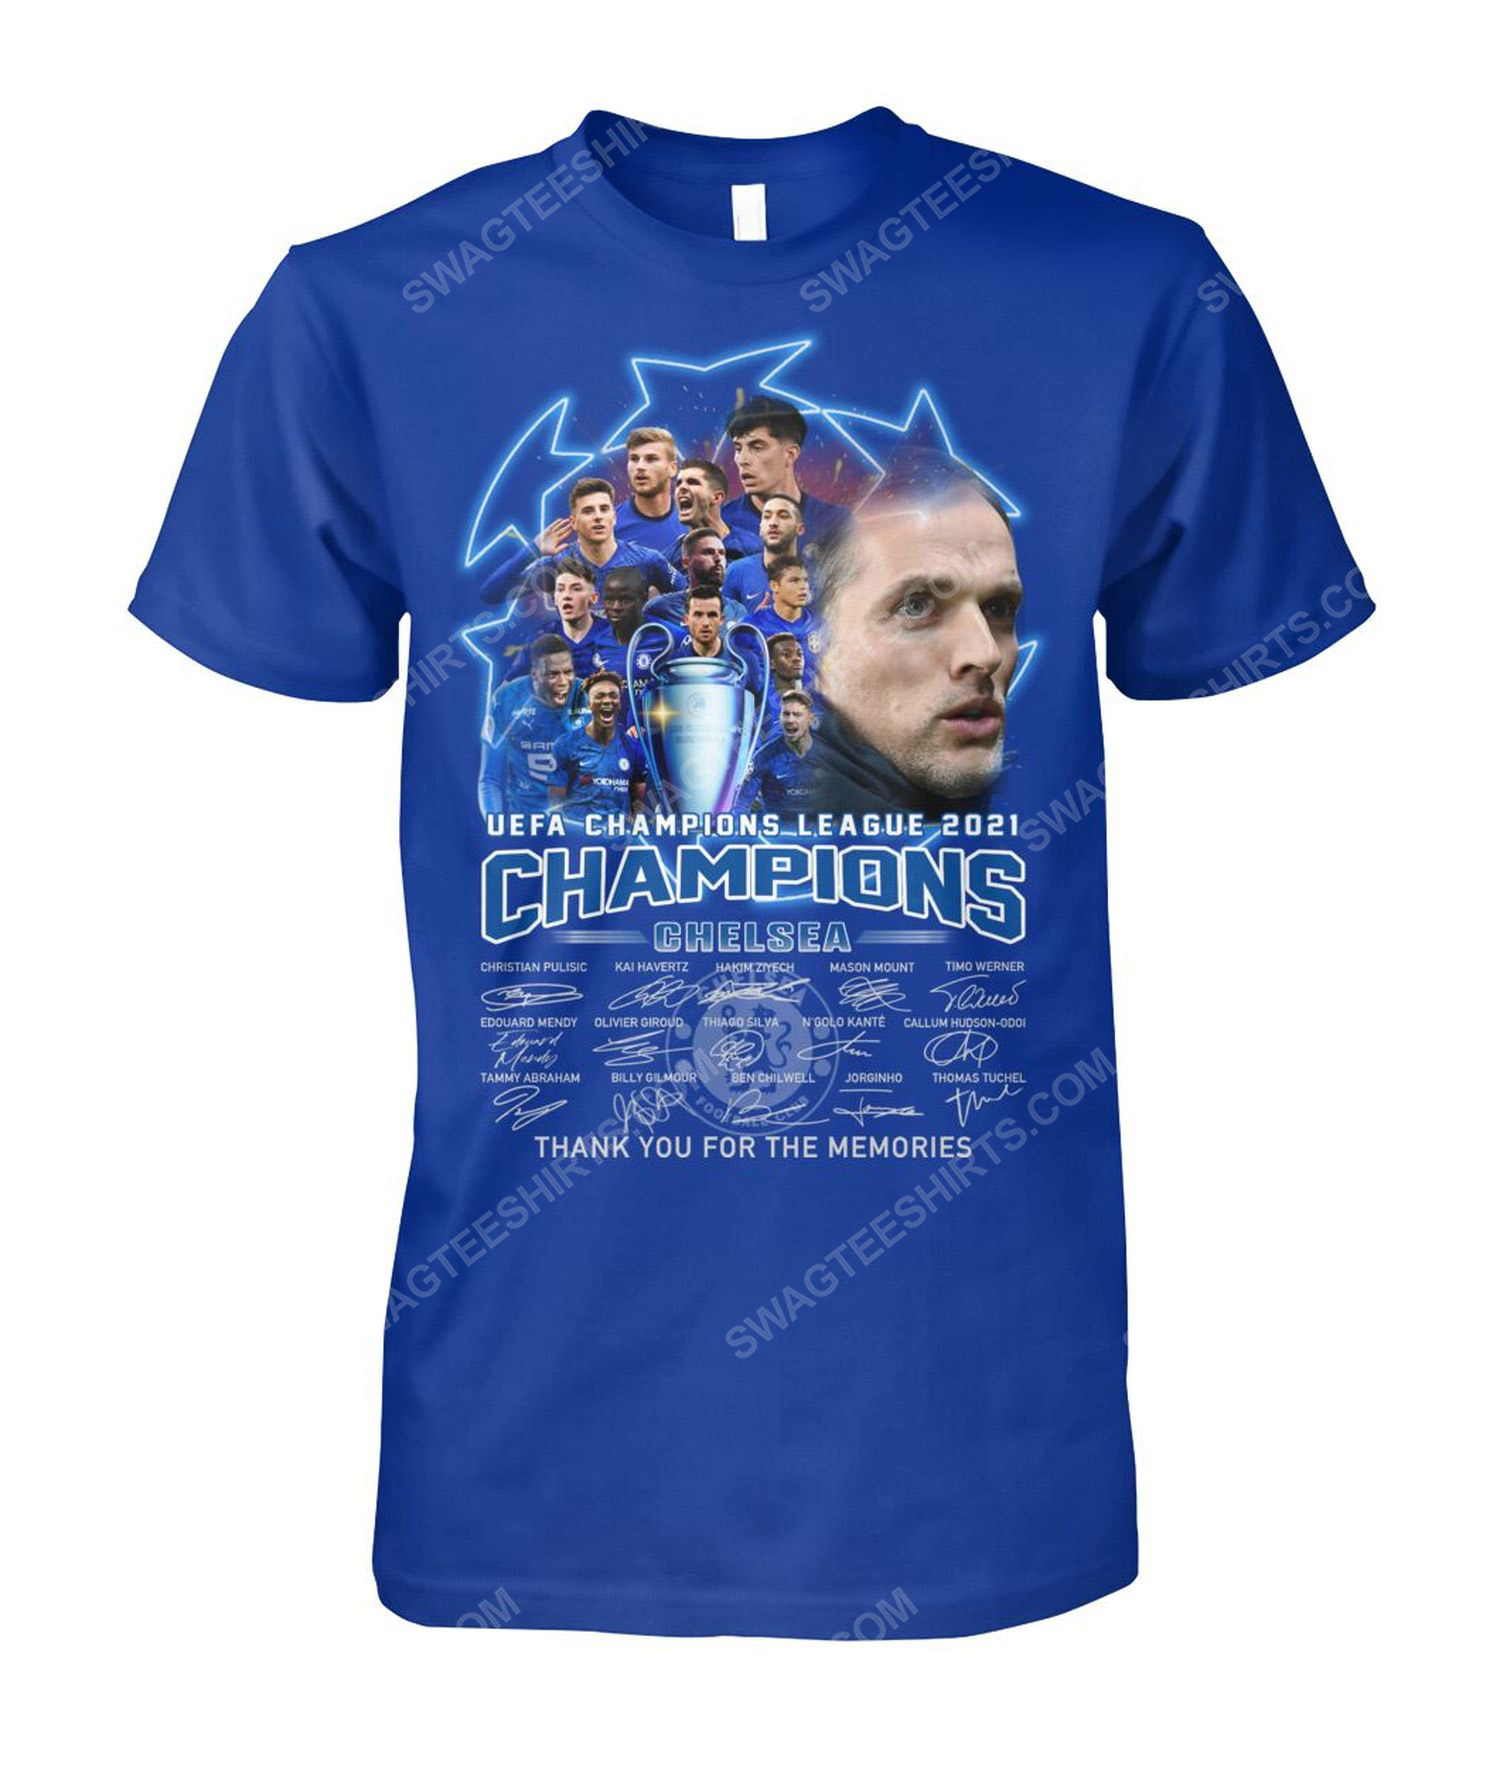 UEFA champions league 2021 chelsea fc thank you for the memories tshirt